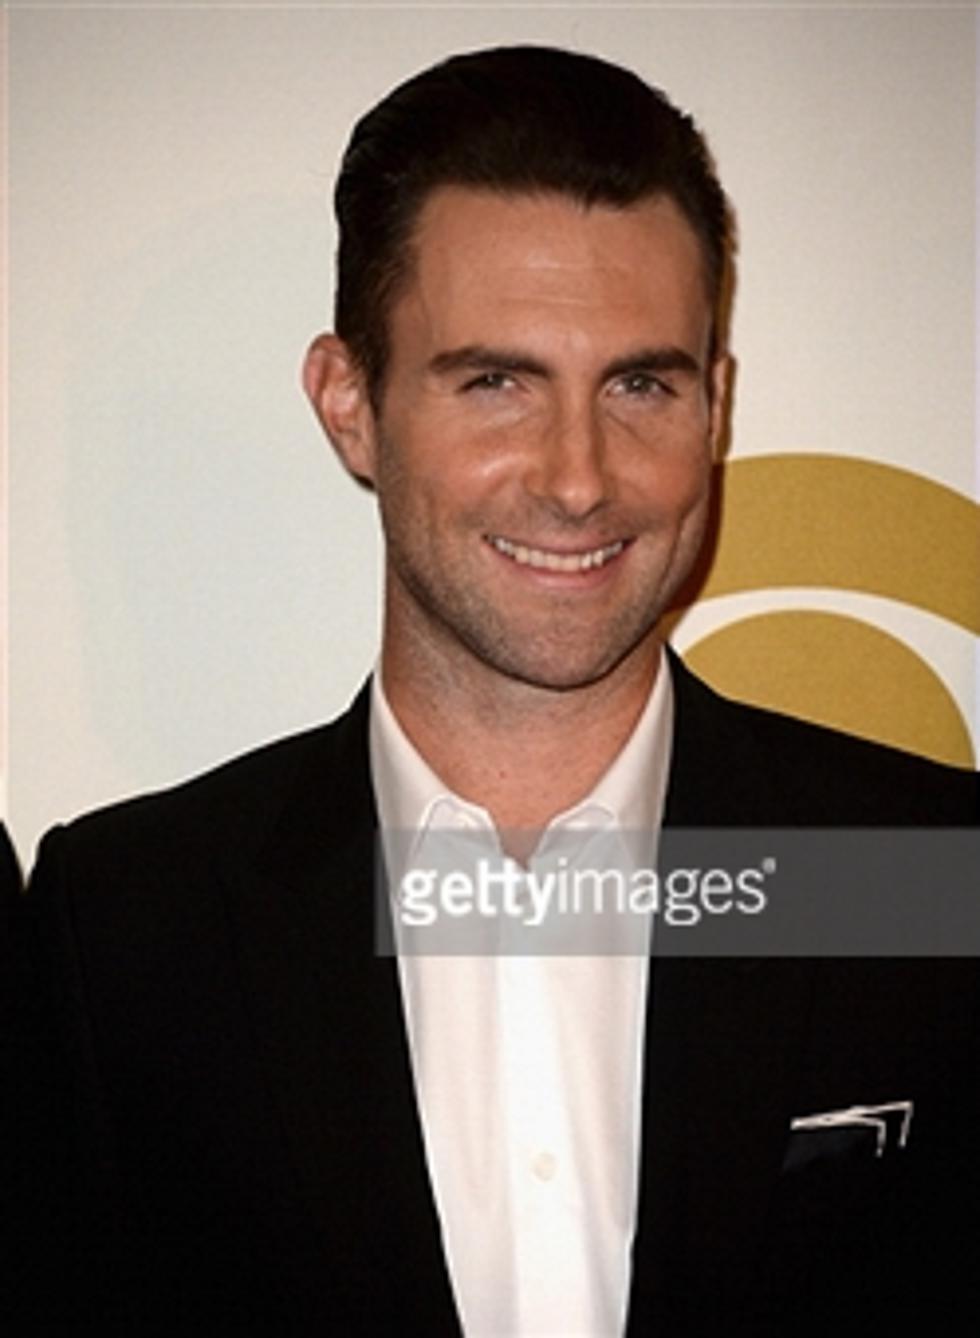 Adam Levine Takes the Stage at the Academy Awards